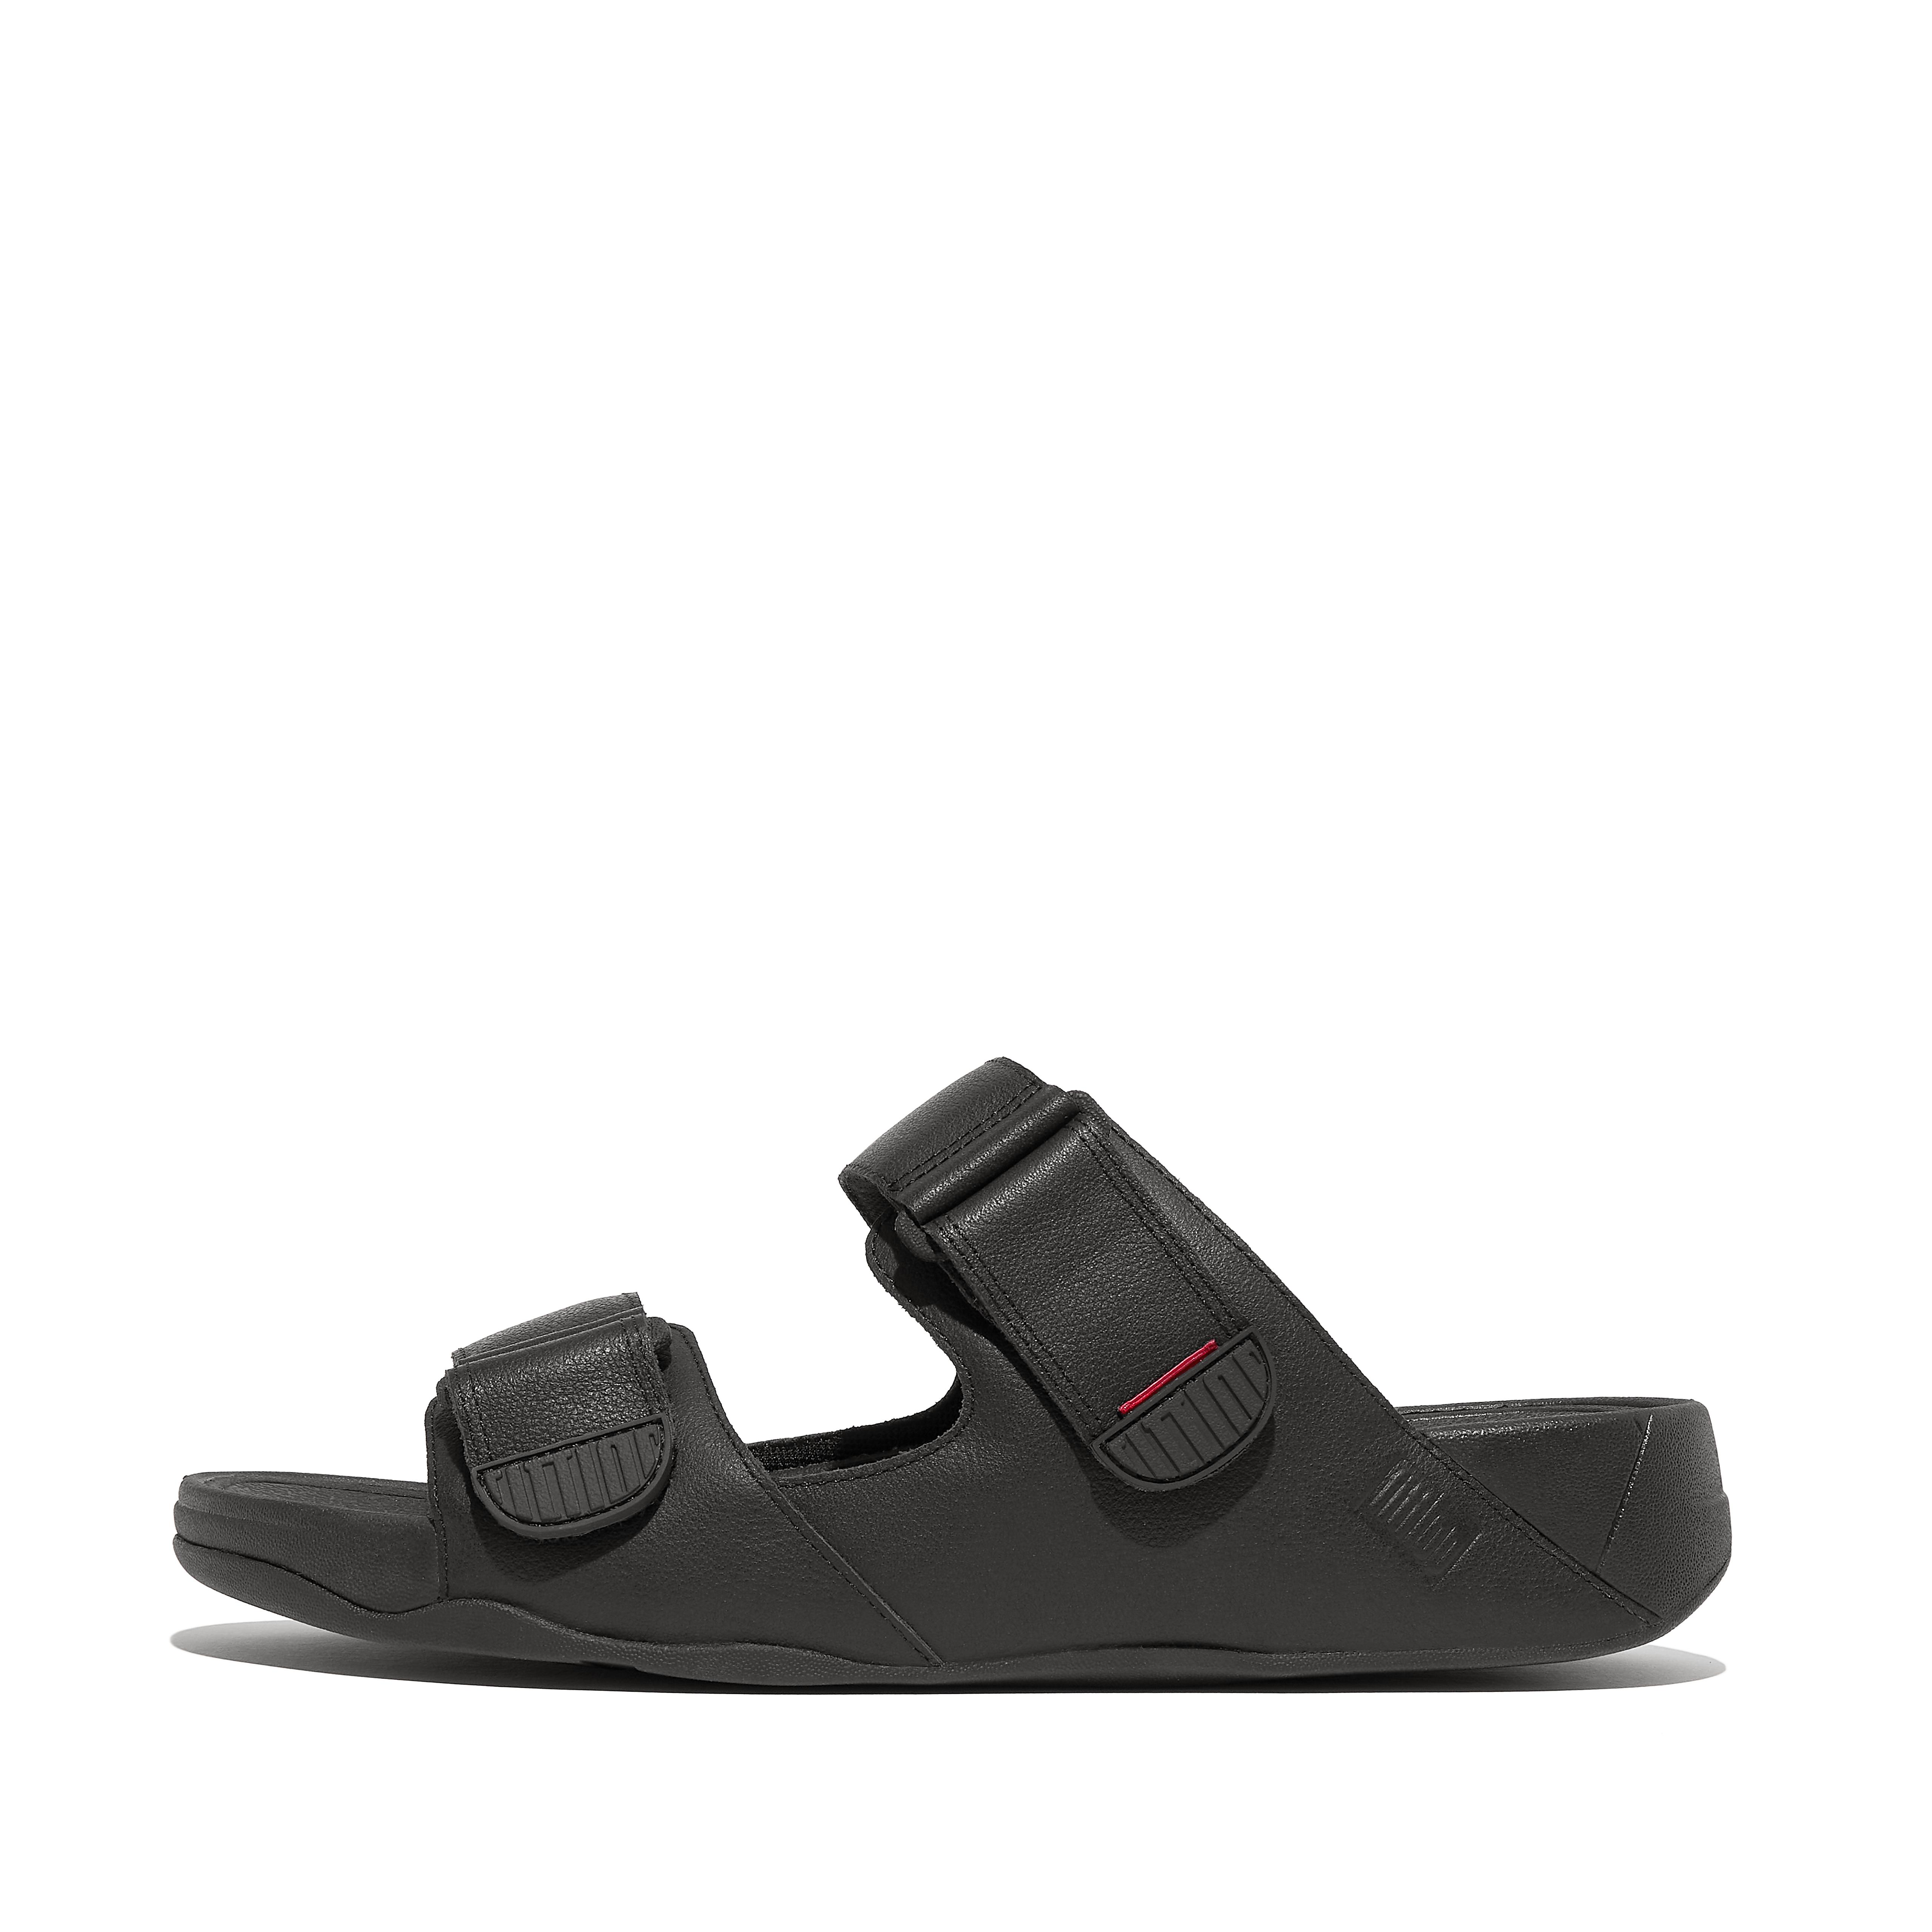 fitflop gogh slide